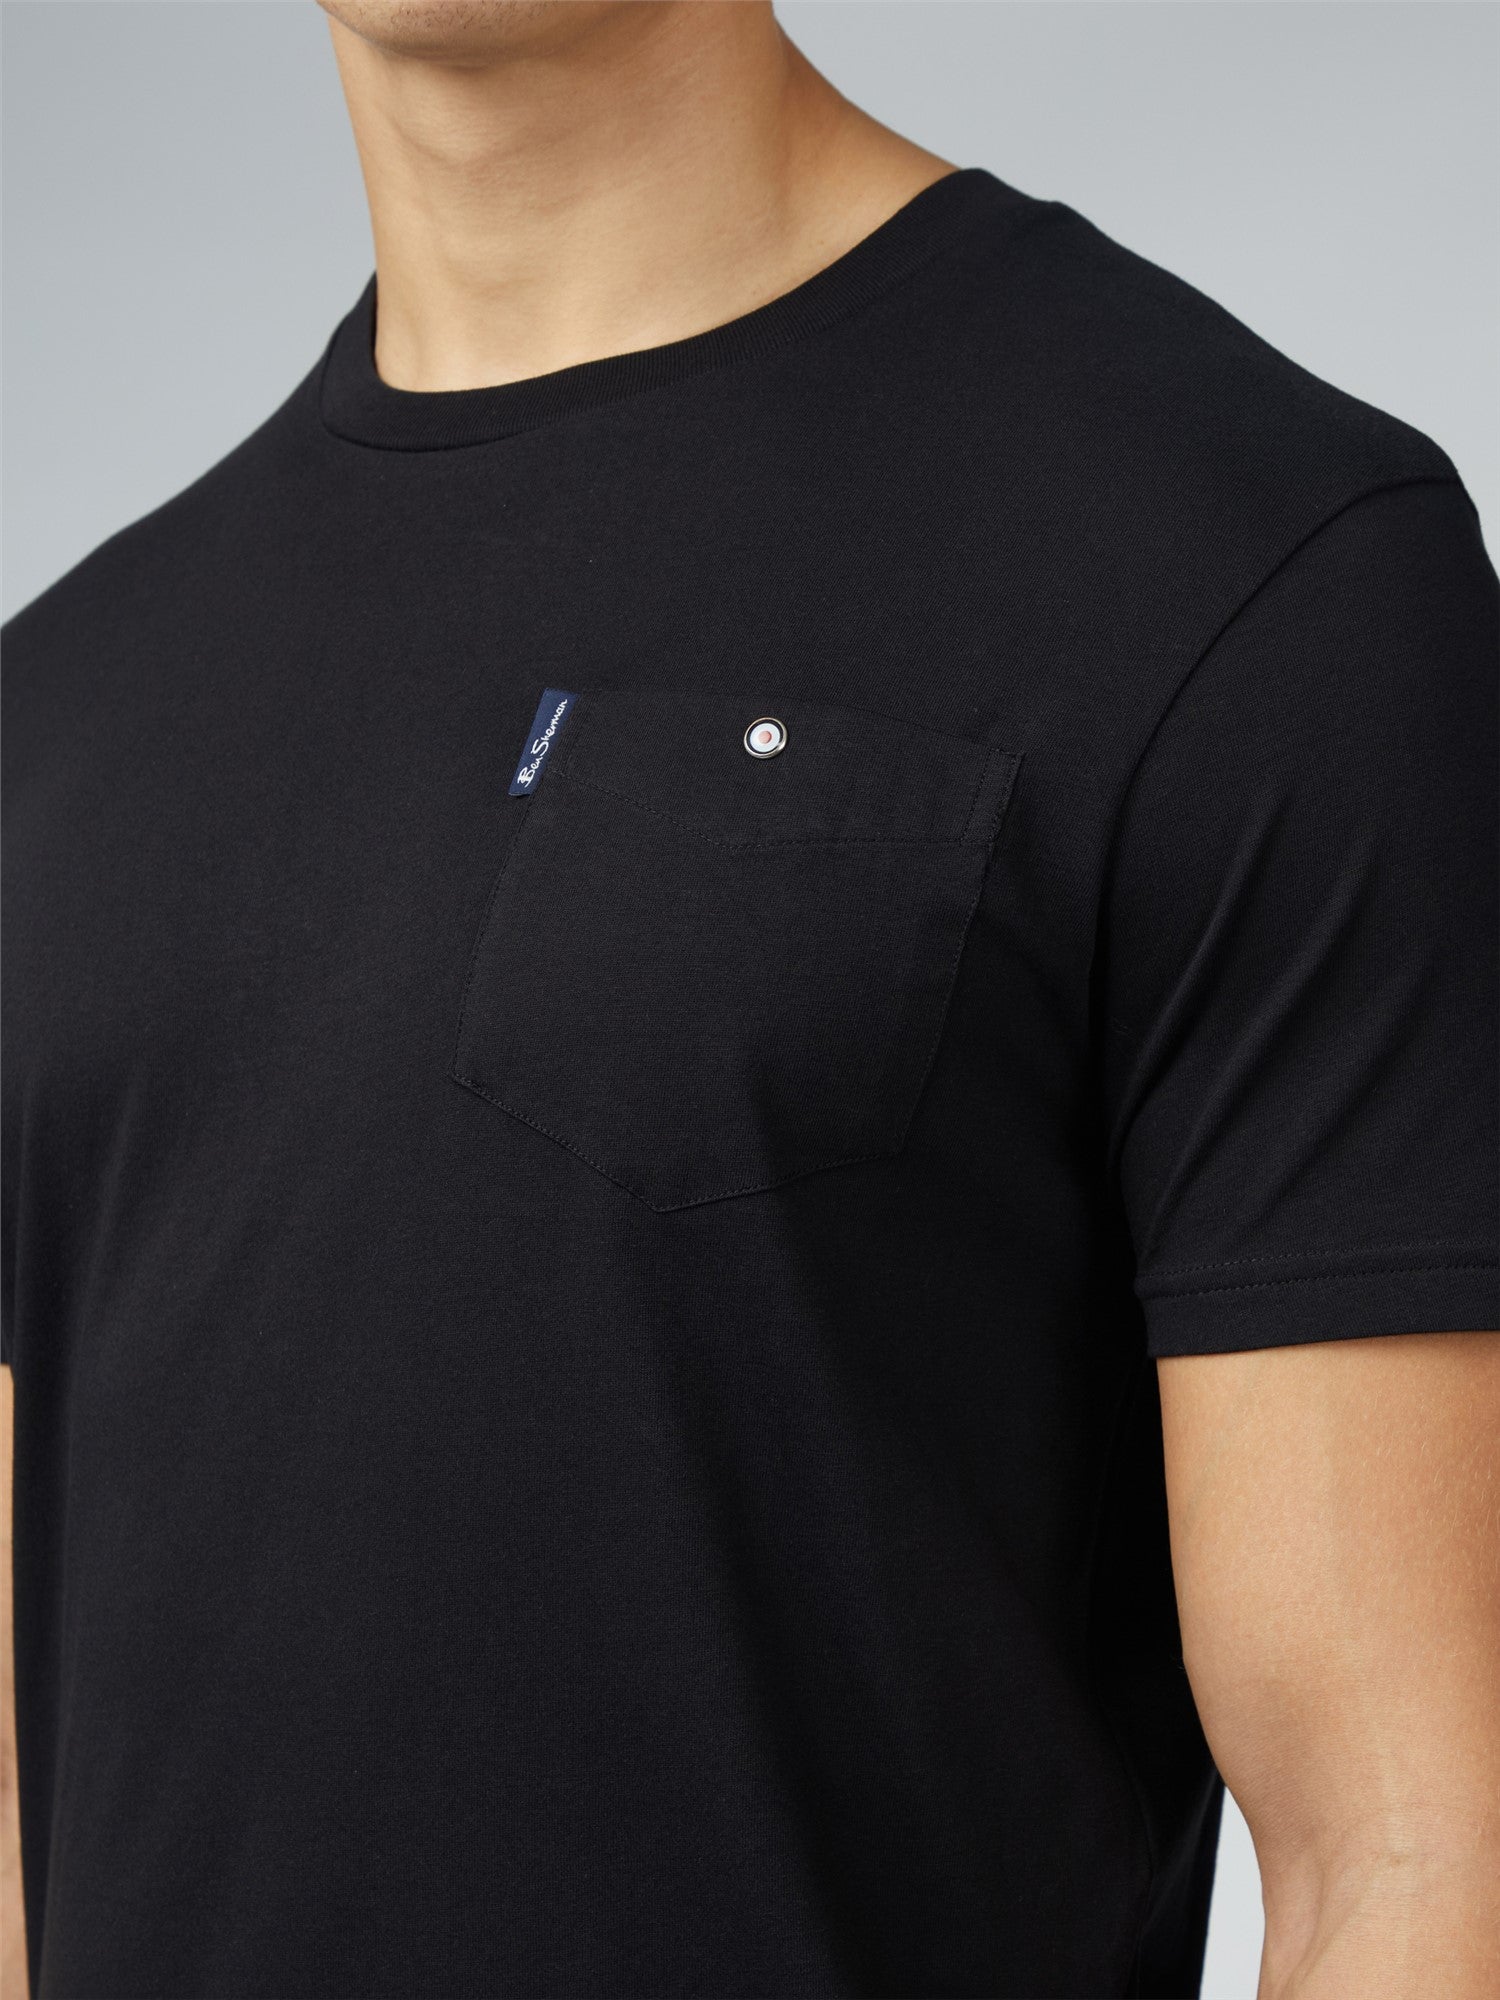 SIGNATURE T-SHIRT WITH CHEST POCKET